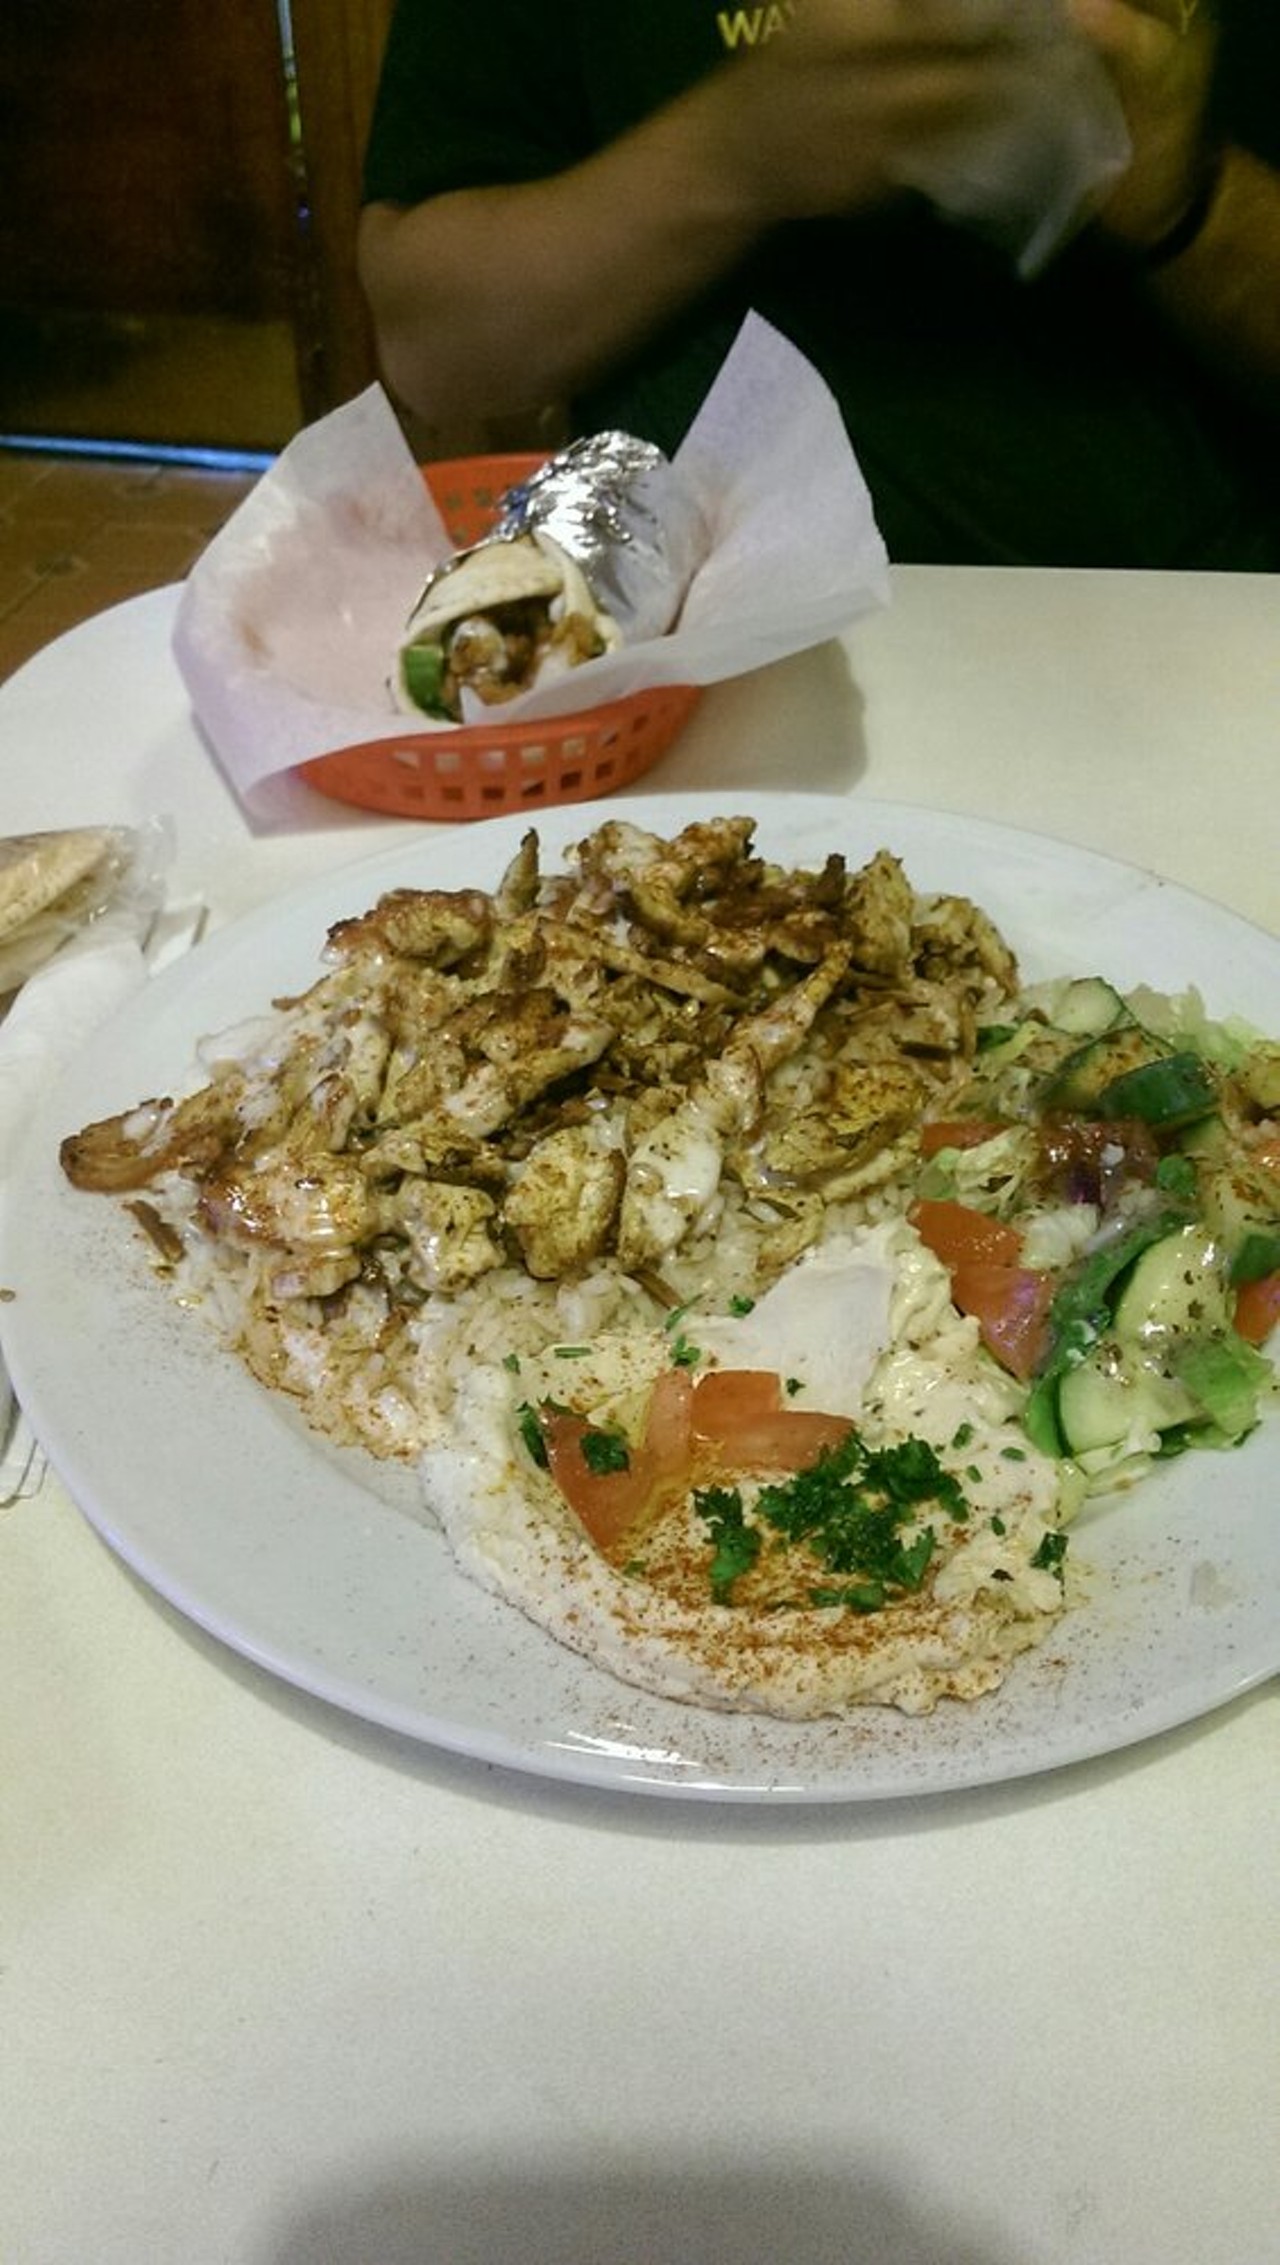 Shawarma | Harmonie Garden  | $9.99 
Detroit | 4707 Anthony Wayne Dr. | (313) 638-2345 
Served with a side of rice or fries, hummus, salad, and pita, this is definitely the best and most bang-for-your-buck shawarma around (sorry Bucharest). Perfect healthy meal for average Wayne State student budget. 
(Photo: Sarah R., via Yelp)